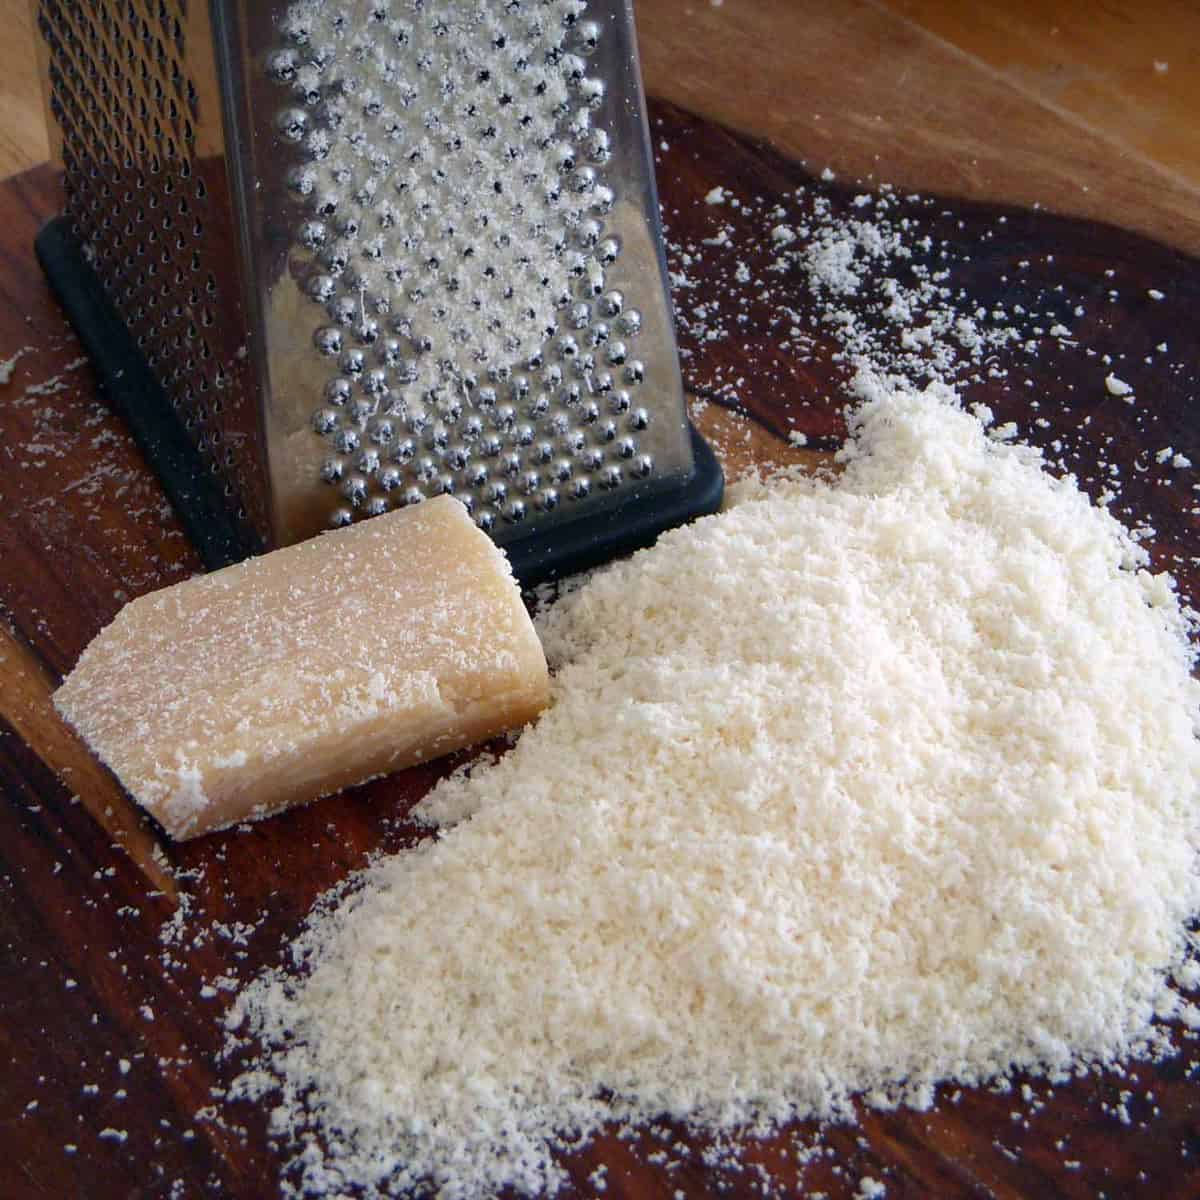 Grated and solid parmesan cheese and a grater on a wooden cutting board.